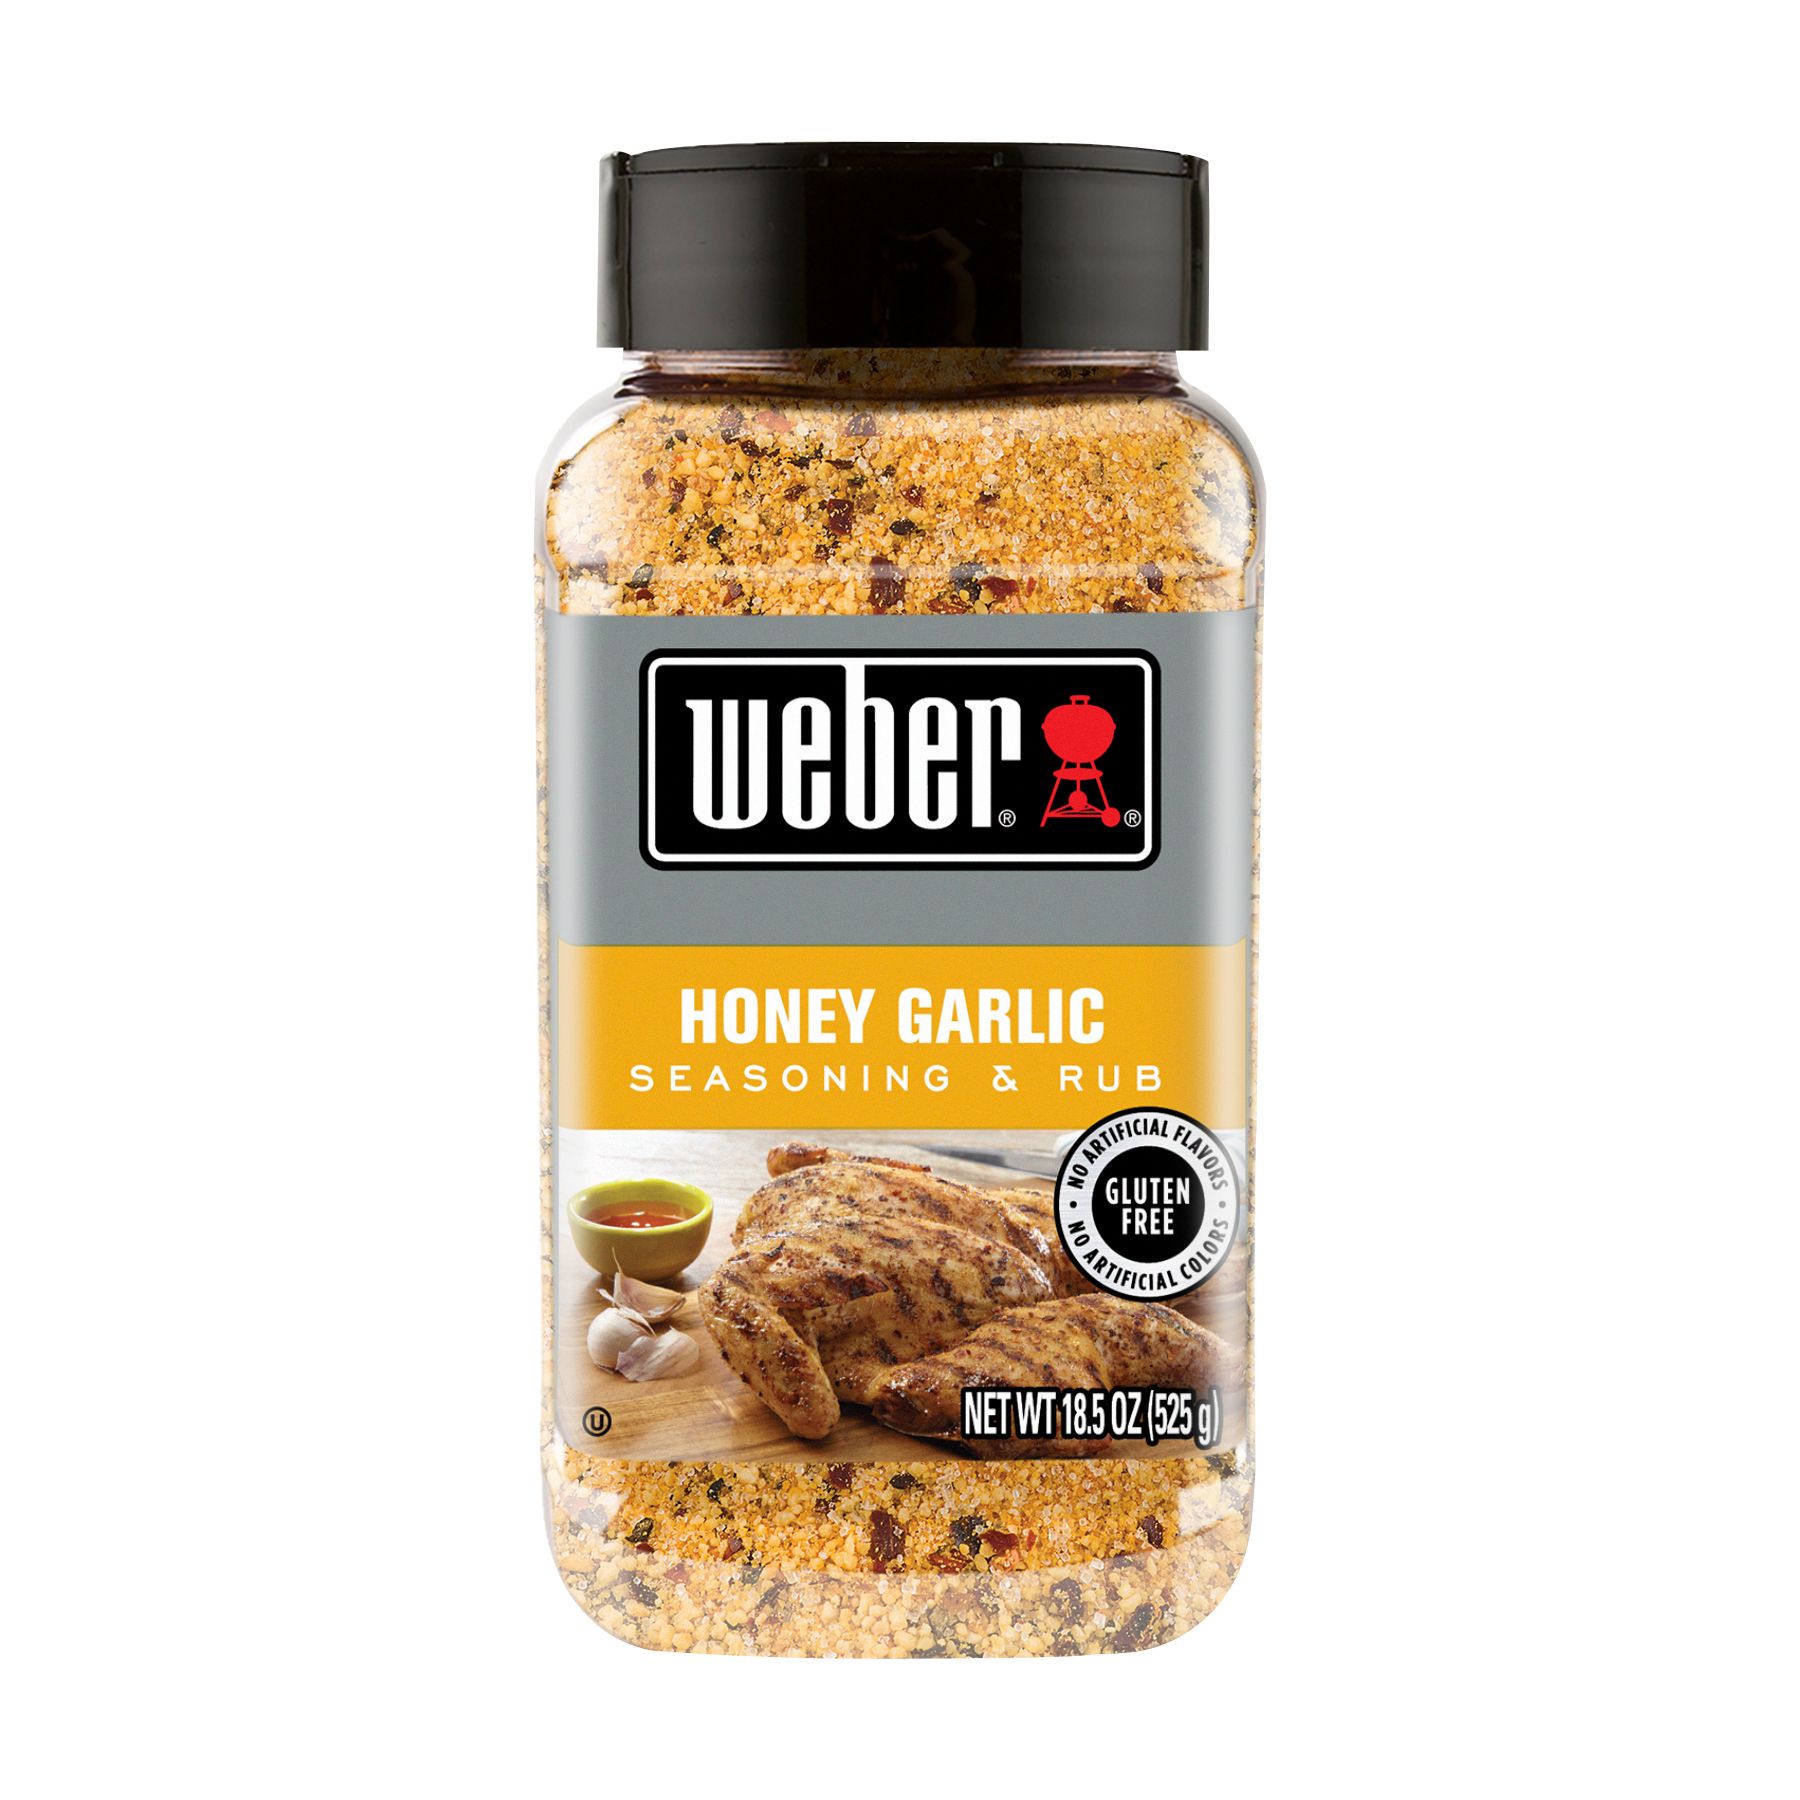 NEW for summer 2022 grilling 🔥🍯 Hot Honey Weber Seasoning is packed with  smoky paprika, brown sugar, and honey! Now exclusively at Sam's Club 👉, By Weber Sauces & Seasonings